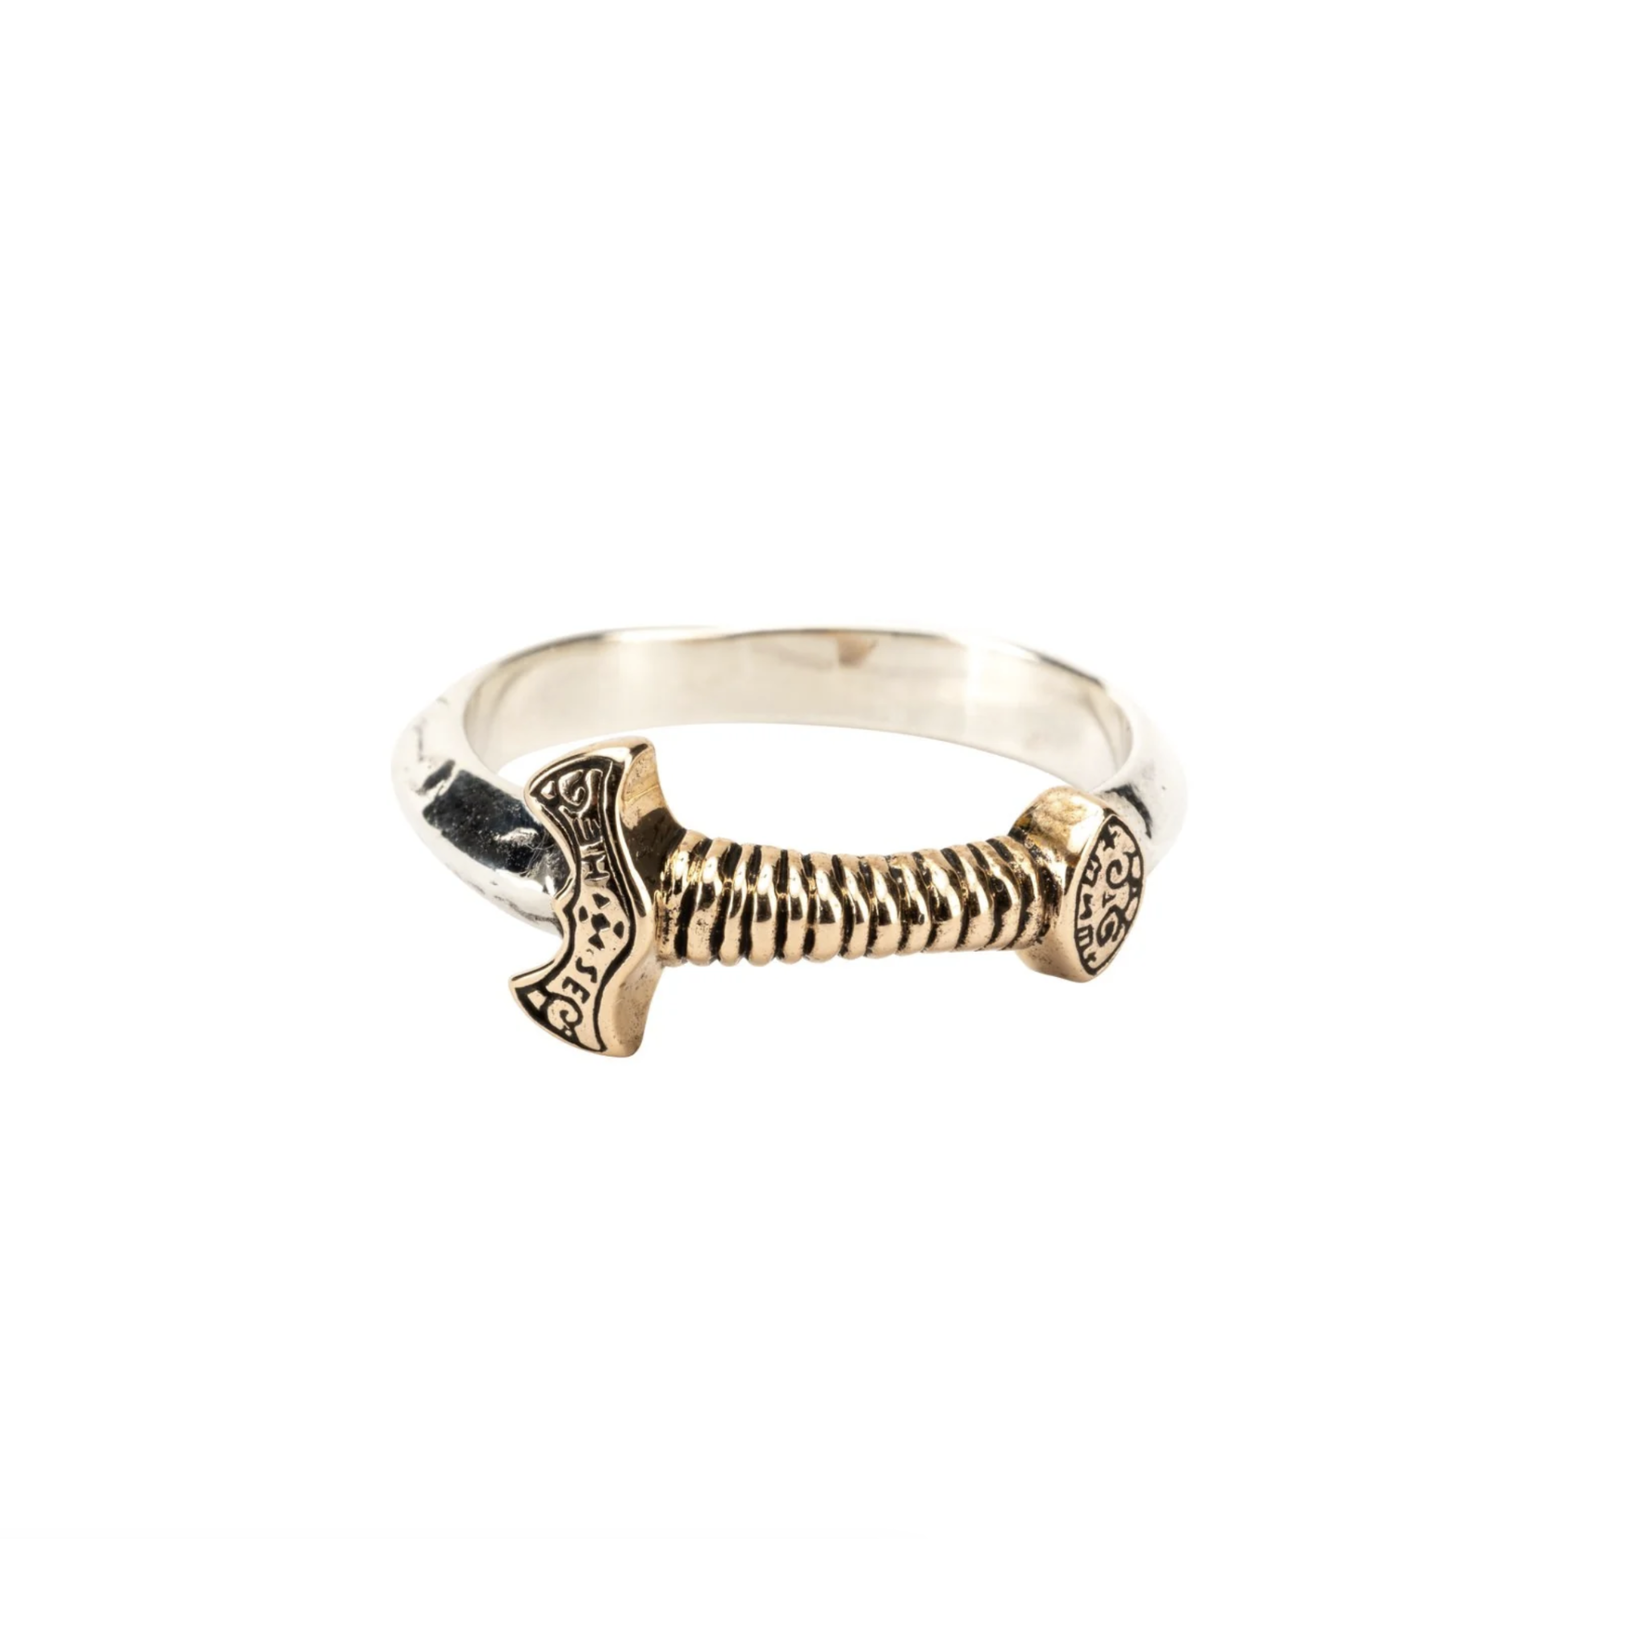 Keith Jack Silver and Bronze Viking Sword Ring